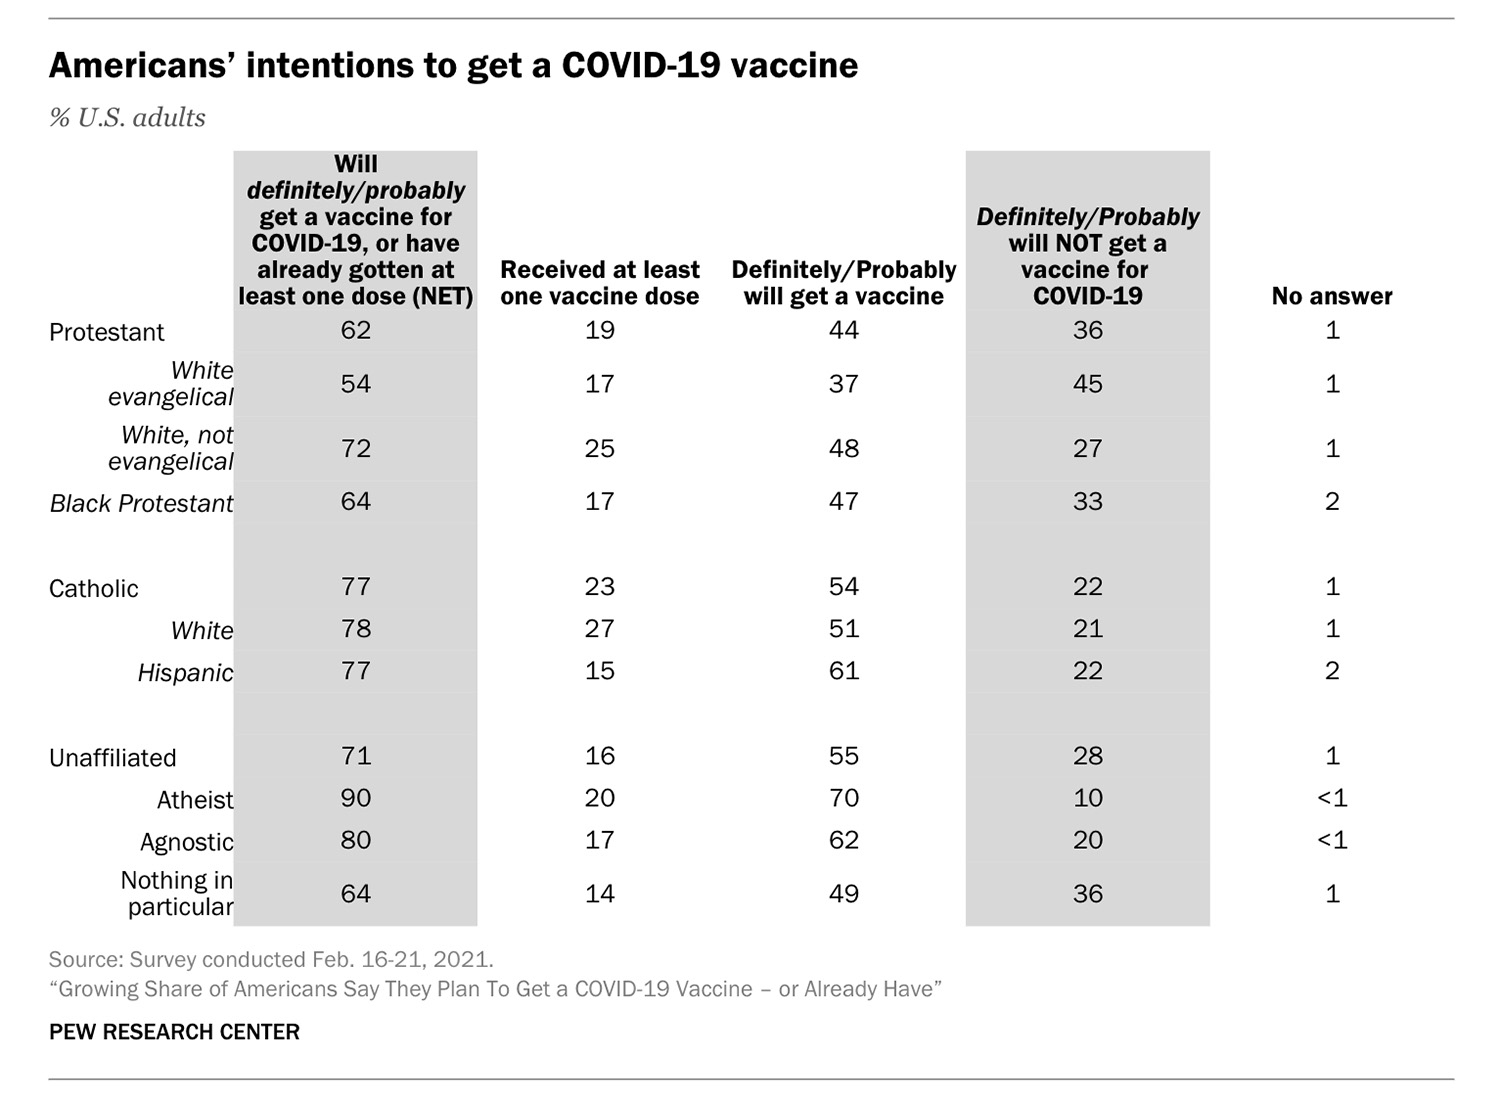 “Americans’ intentions to get a COVID-19 vaccine” Graphic courtesy of Pew Researh Center